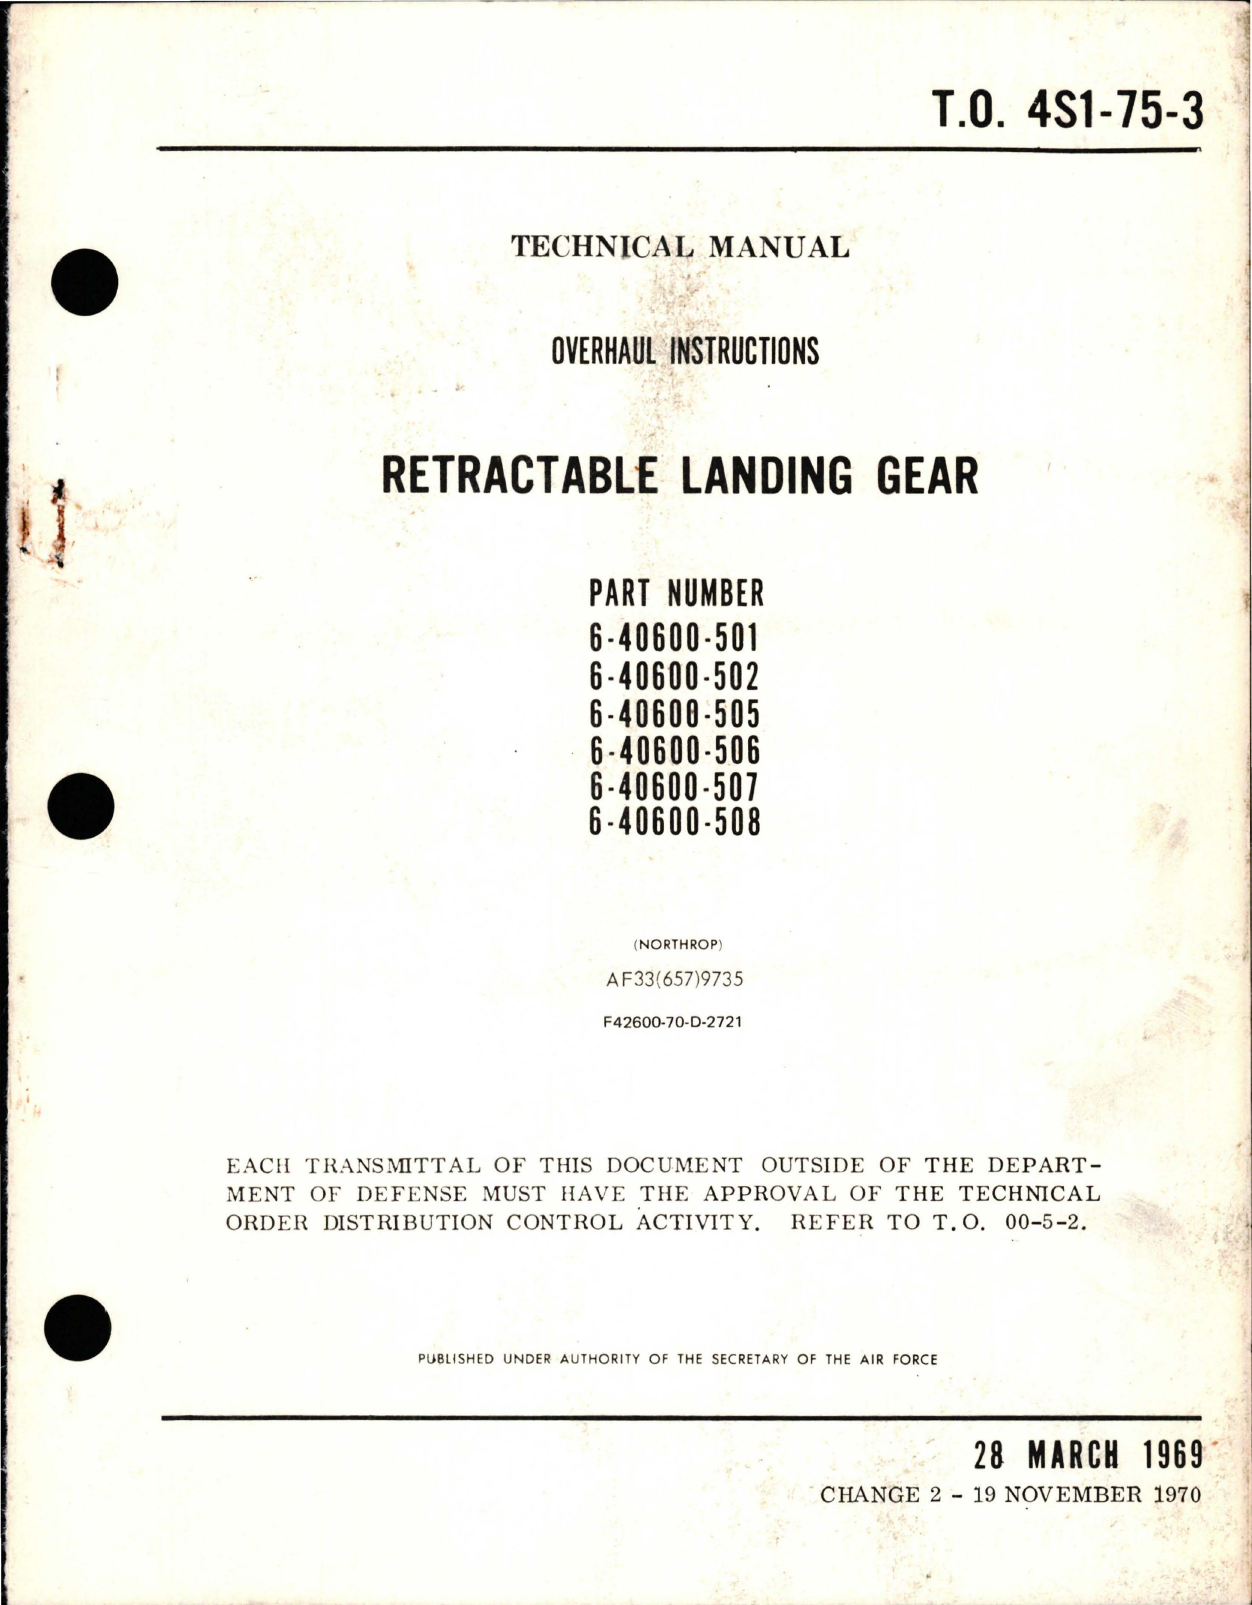 Sample page 1 from AirCorps Library document: Overhaul Instructions for Retractable Landing Gear